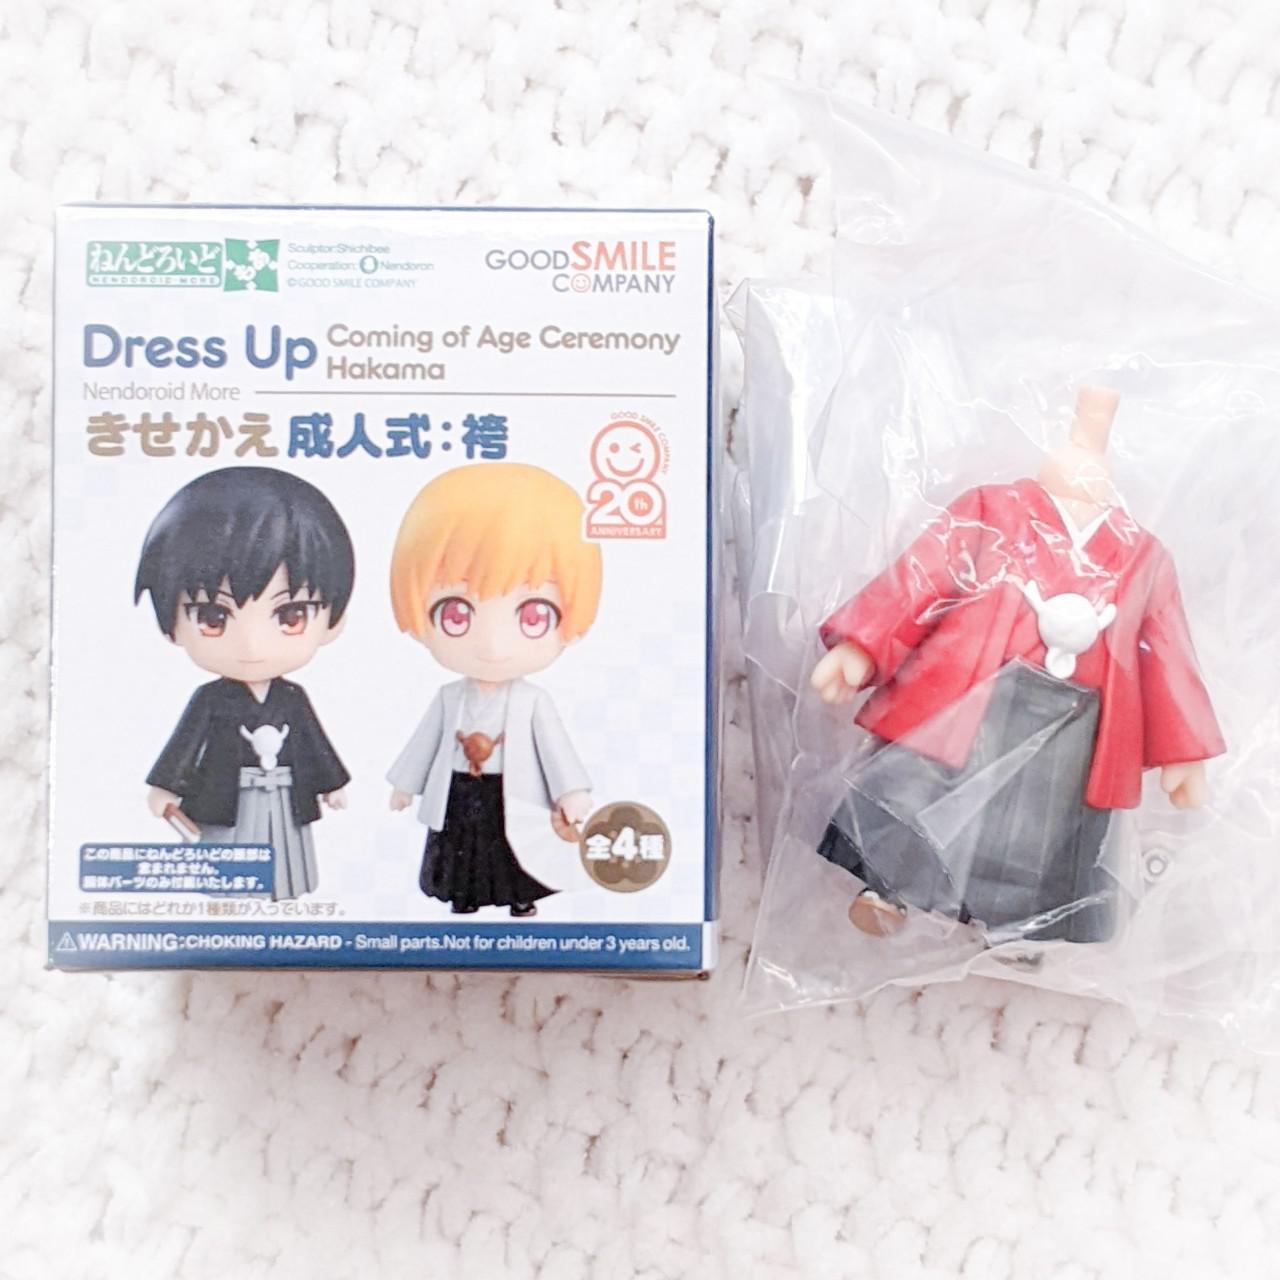 Nendoroid More Dress Up Outfit - Coming of Age Ceremony Kimono Hakama (RED)